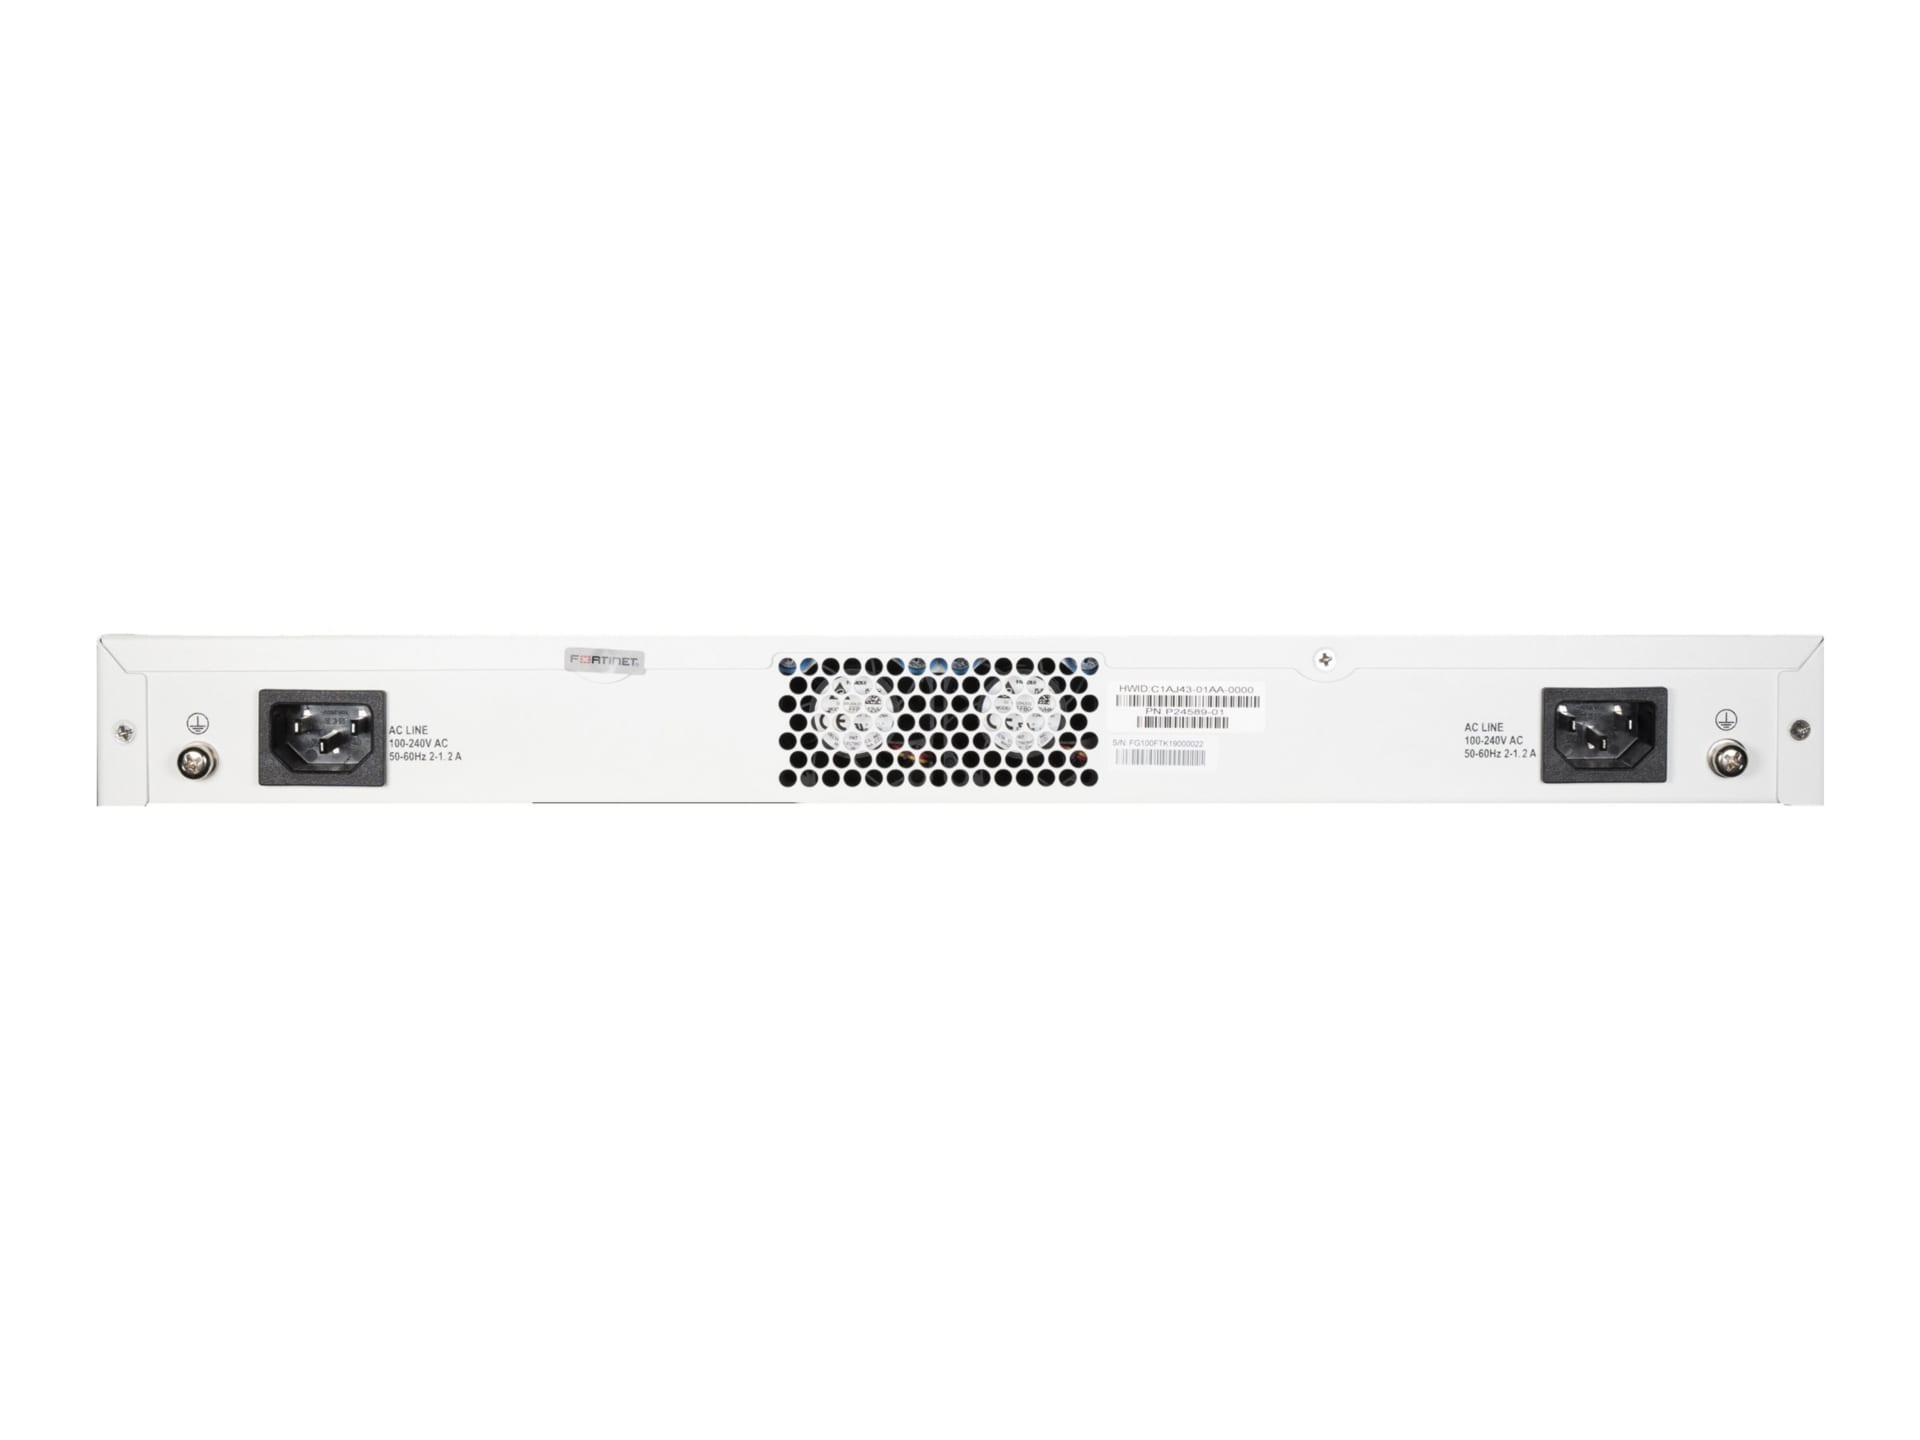 Fortinet FortiGate 100F - security appliance